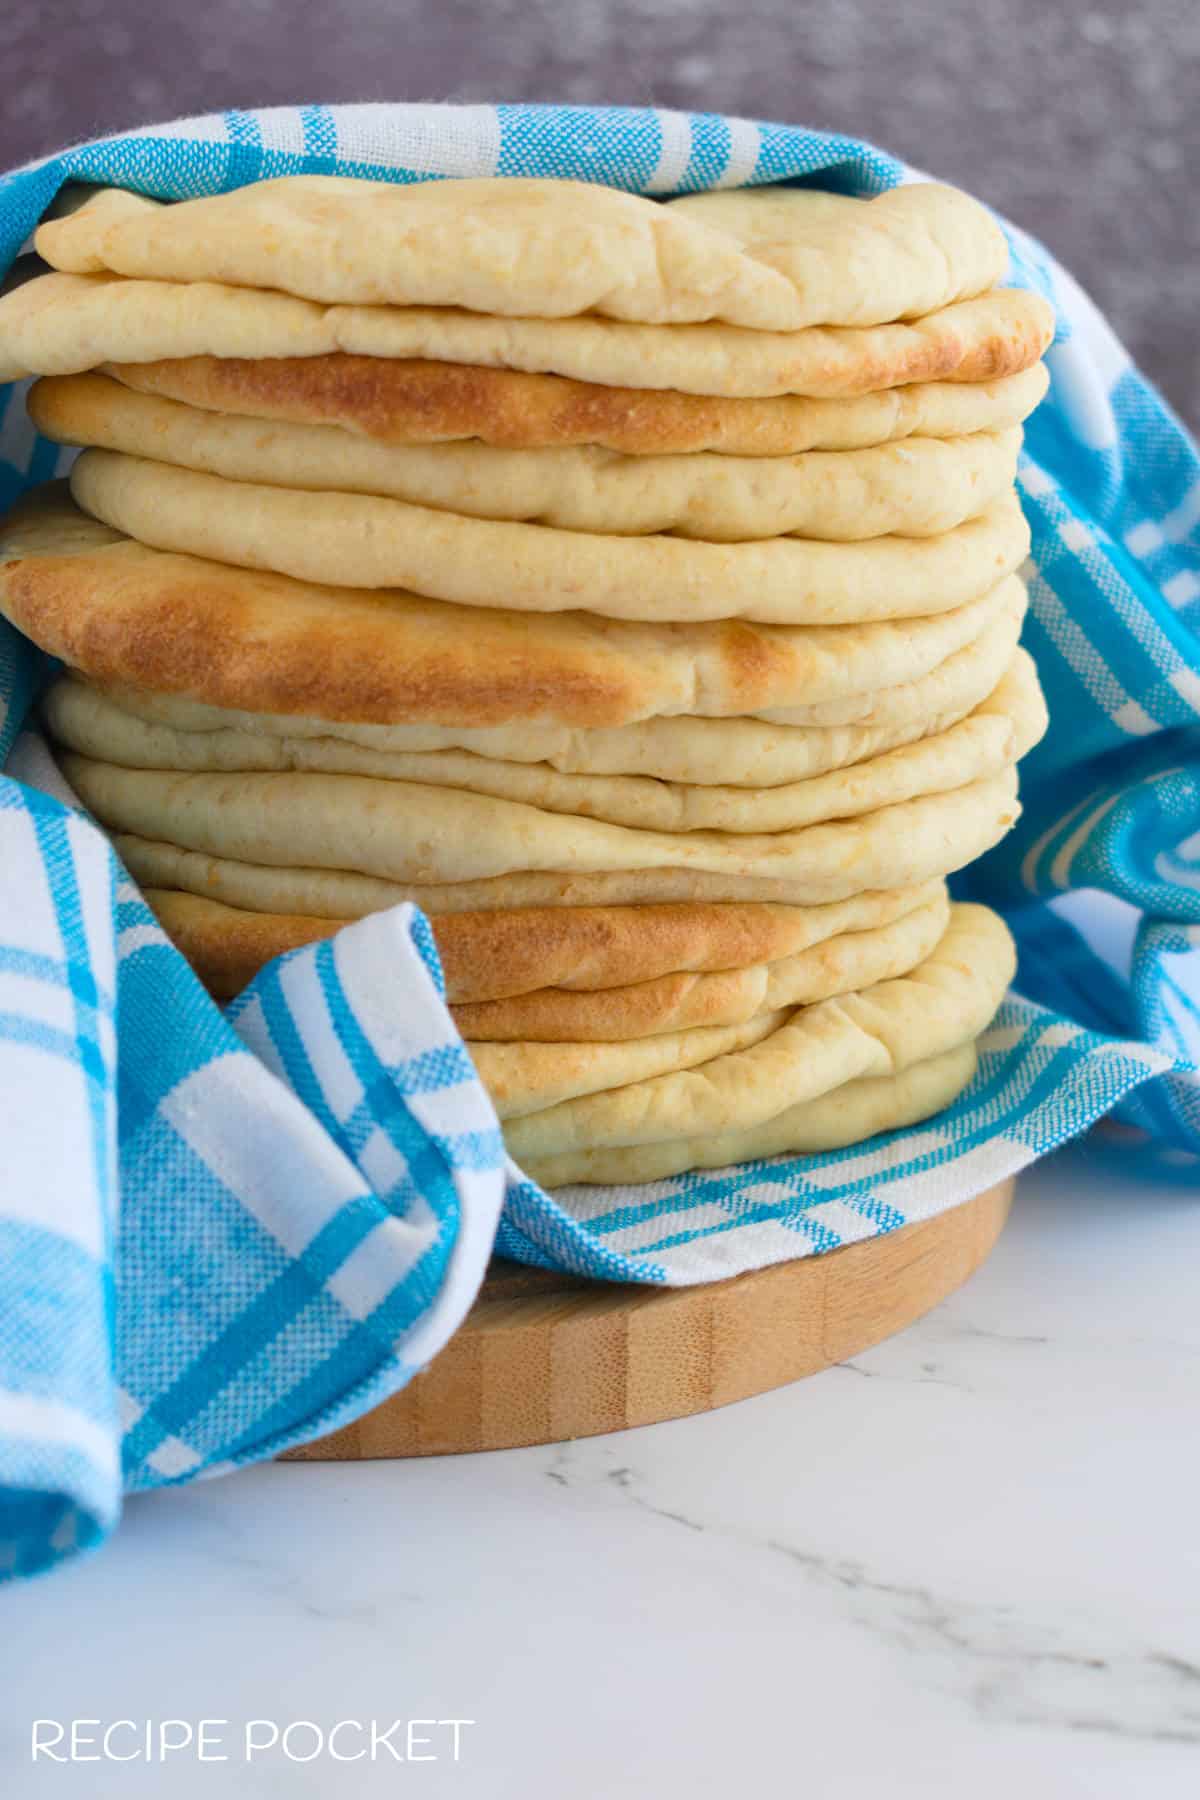 A stack of freshly made pita bread wrapped in a clean tea towel.